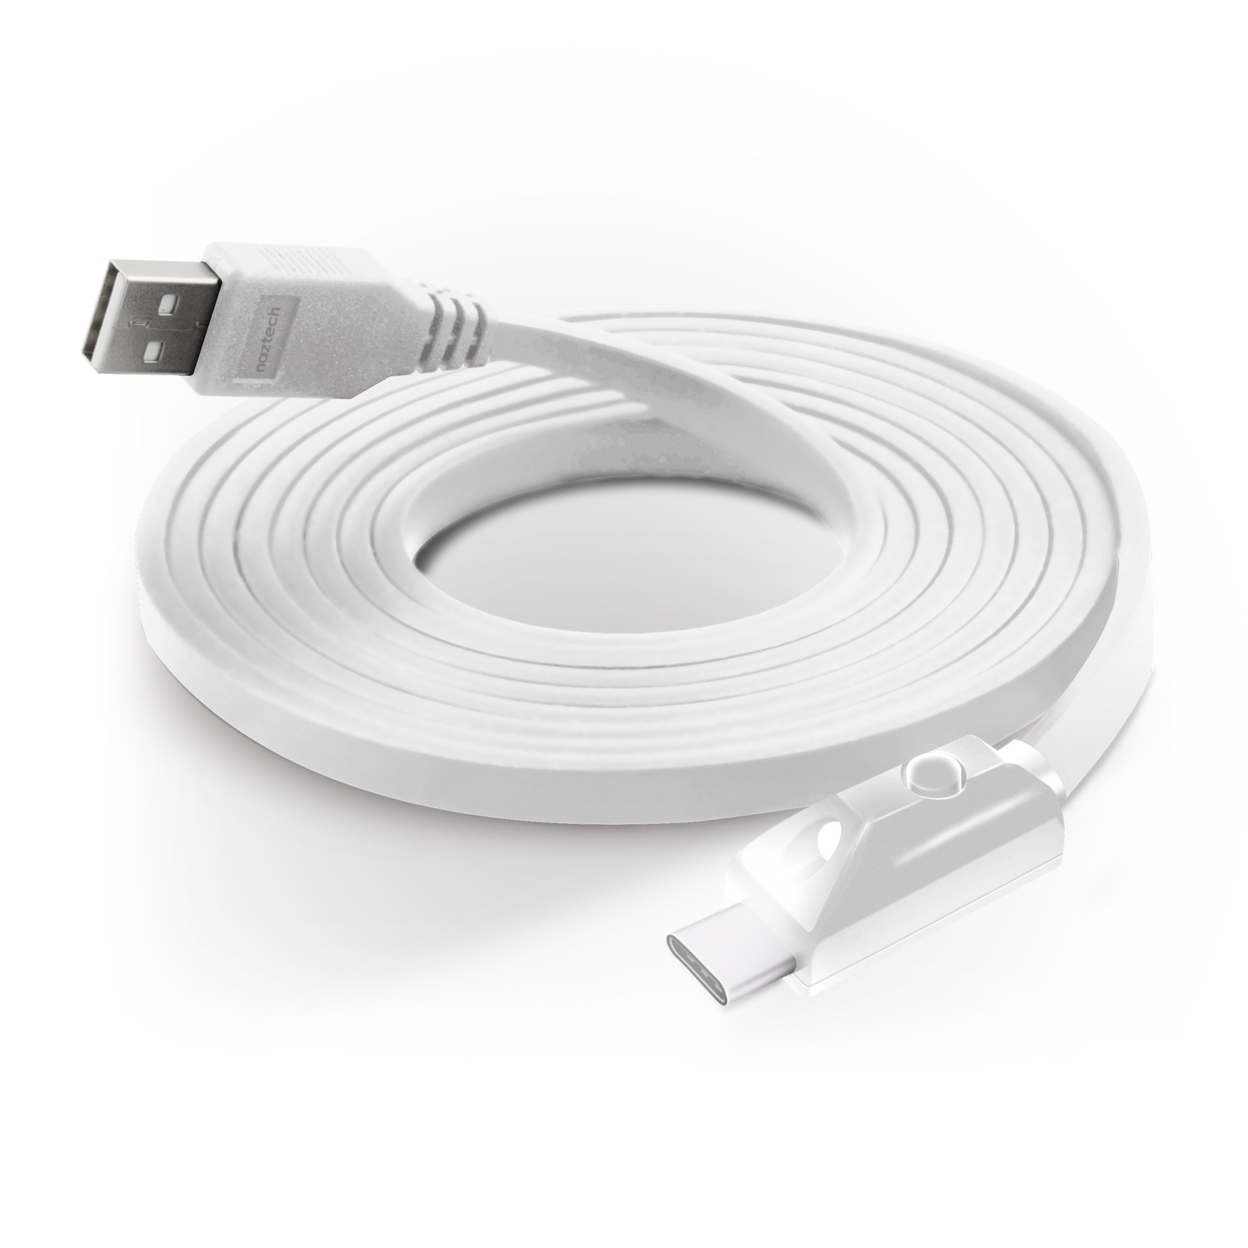 Naztech LED USB-A To USB-C 2.0 Charge & Sync Cable 6ft (USBCABLE8-PRNT) - White